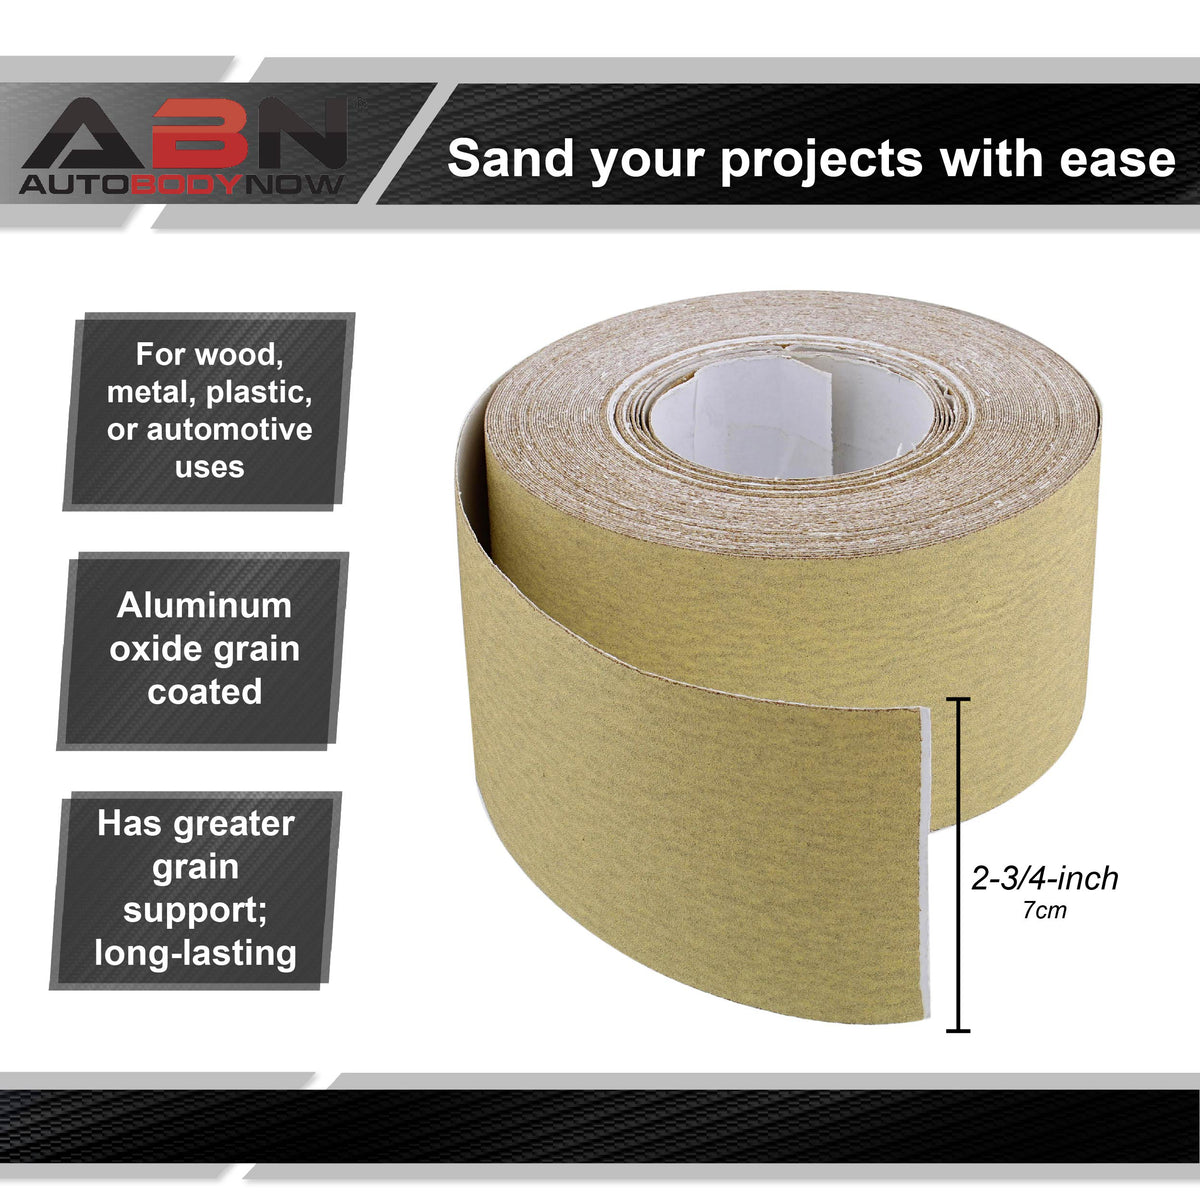 Adhesive 220-Grit Aluminum Oxide Sandpaper Roll 2-3/4” Inch x 20 Yards